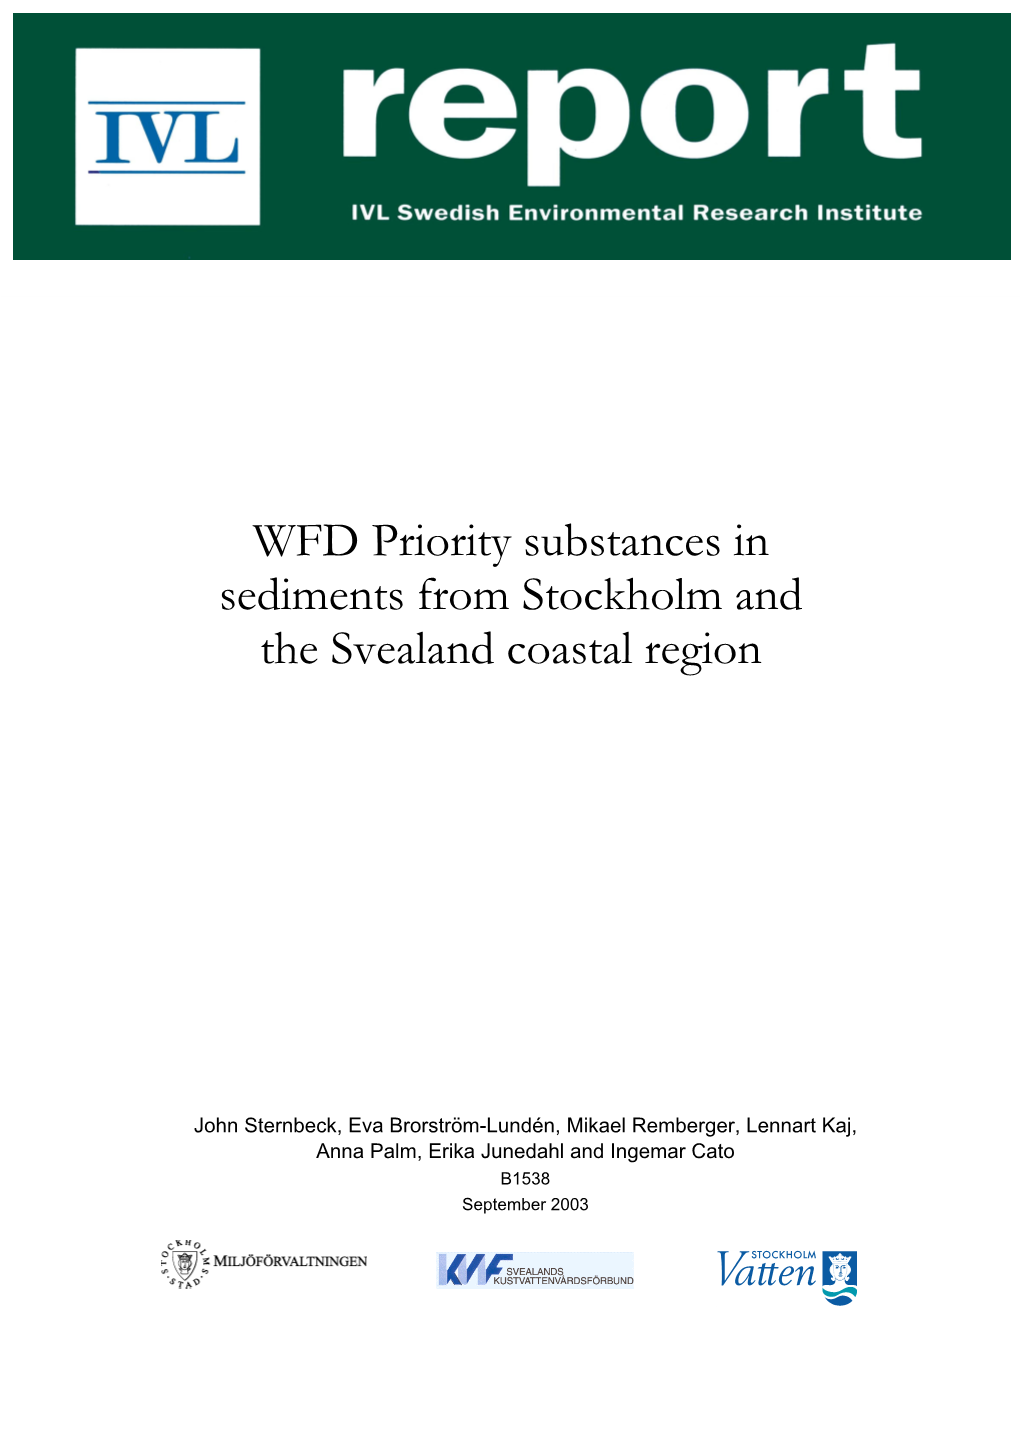 WFD Priority Substances in Sediments from Stockholm and the Svealand Coastal Region